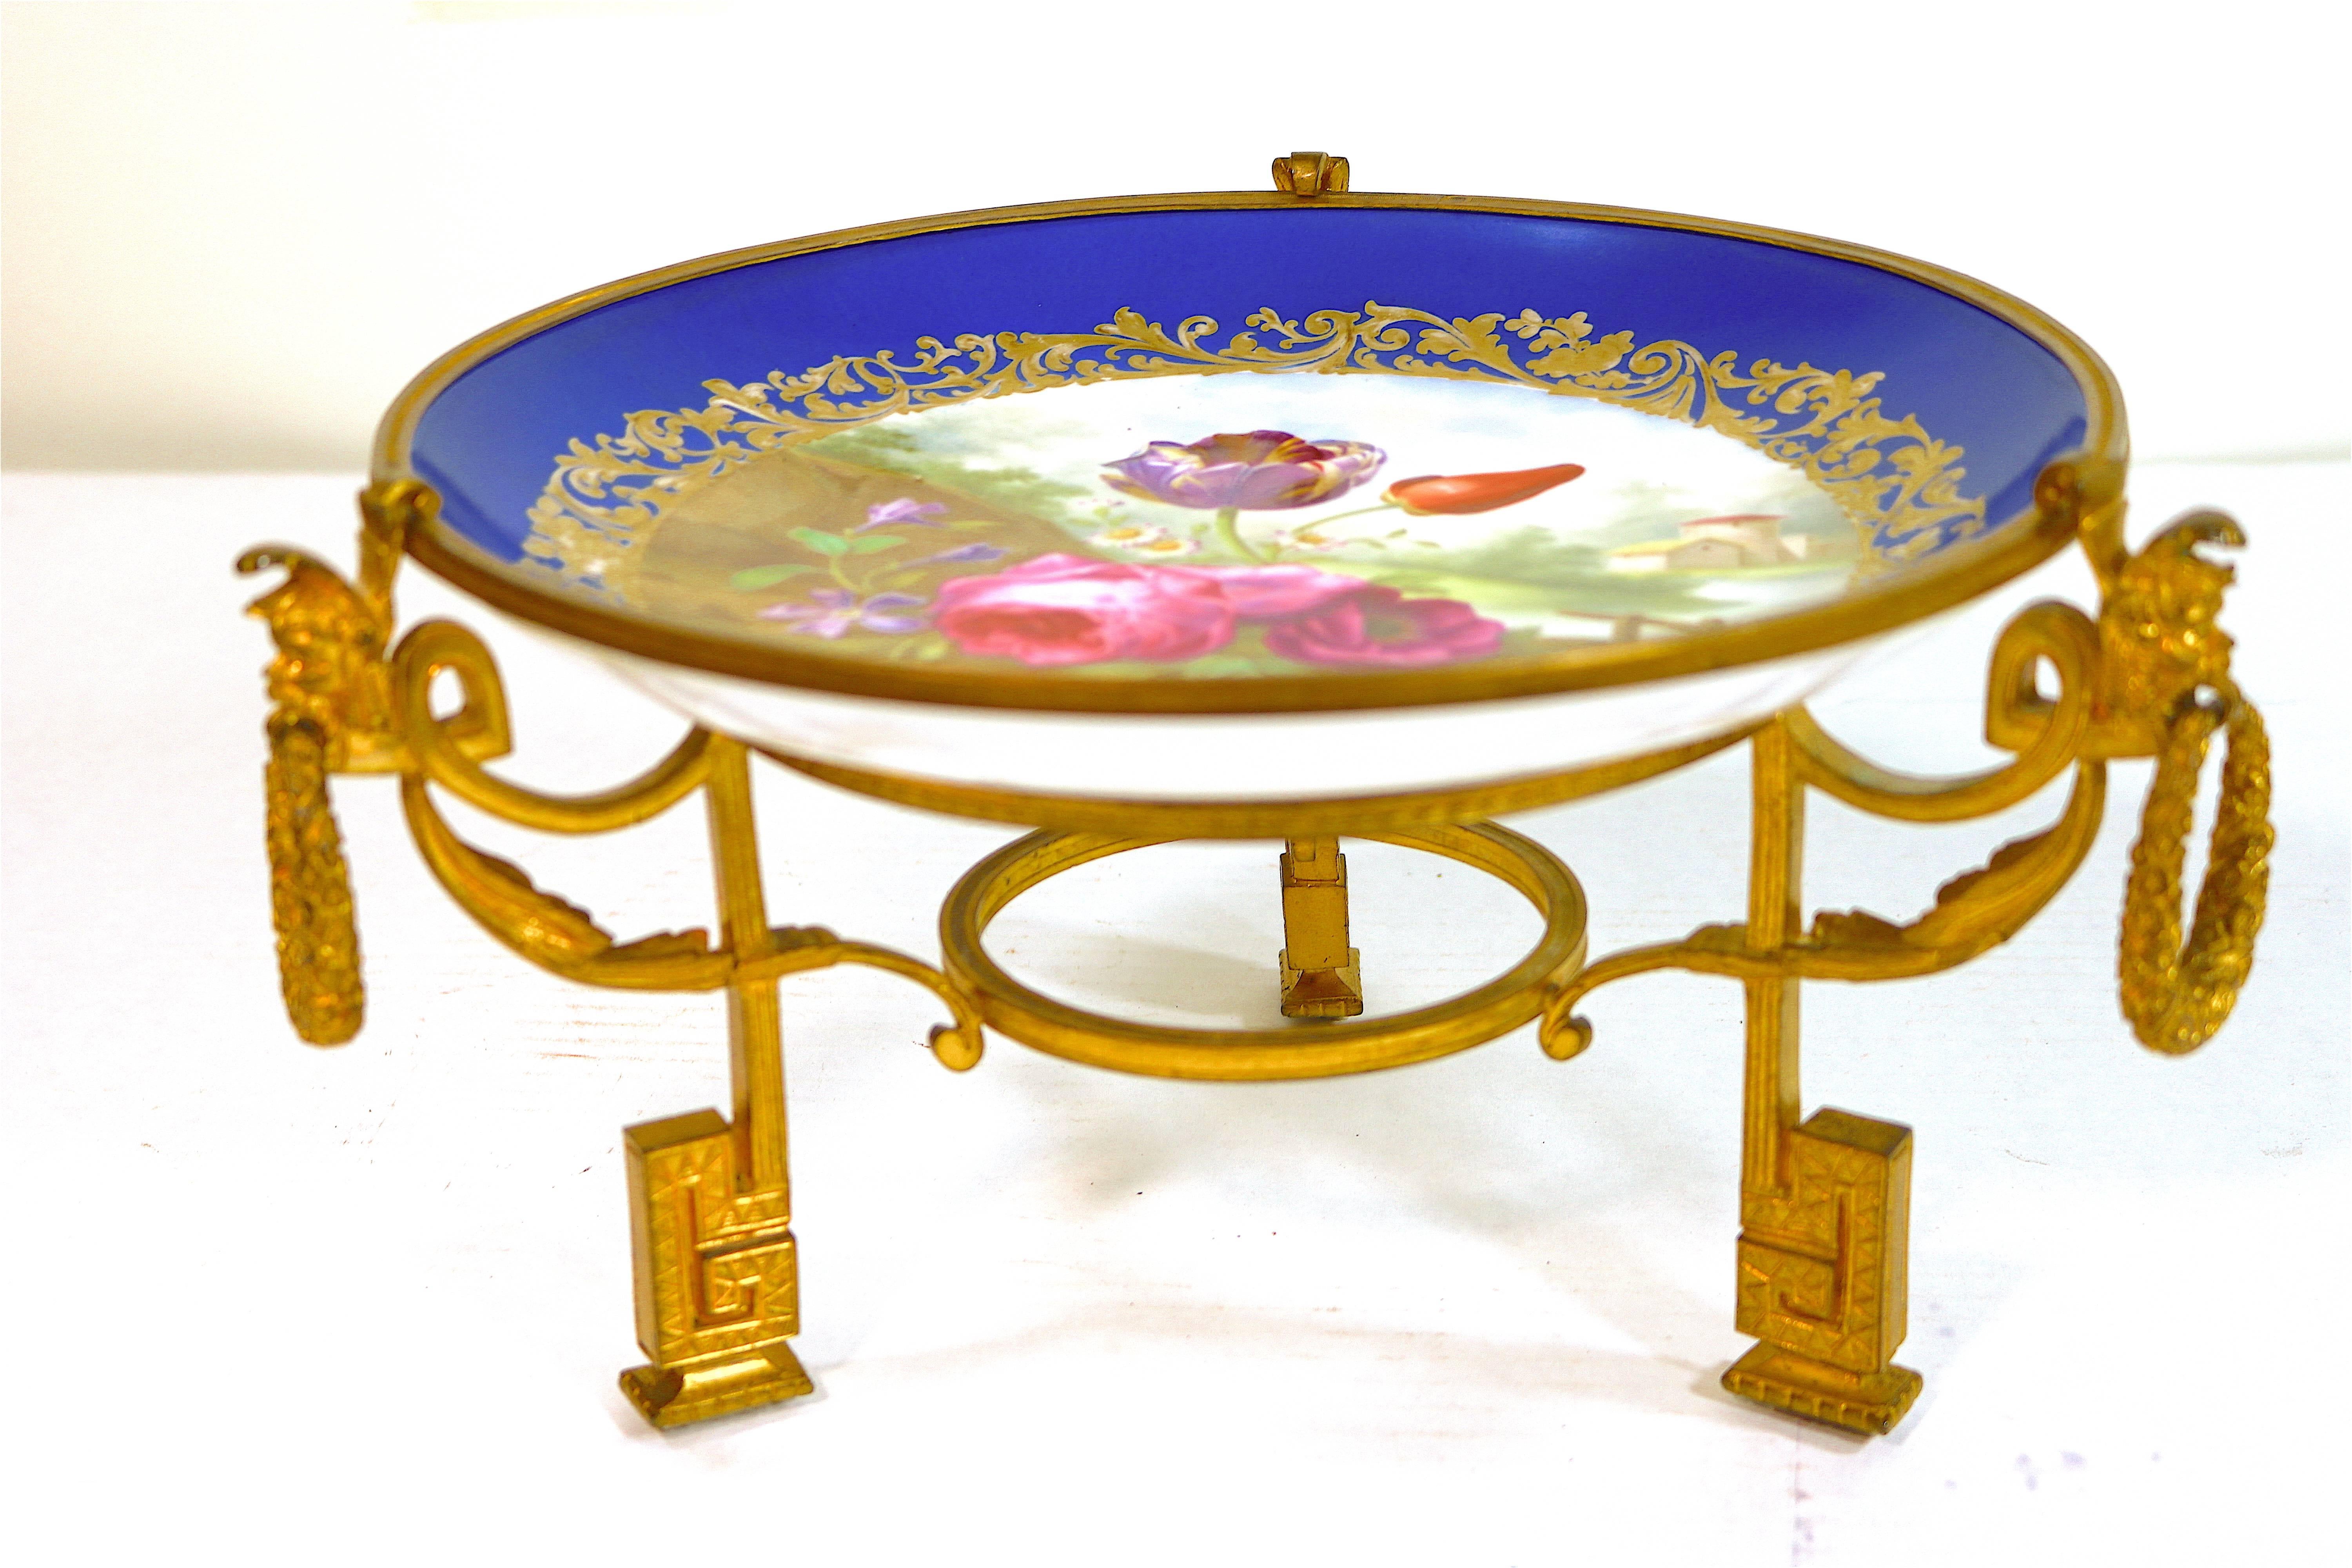 A magnificent and rare Napoleon III compote.
-Chateau des Tuileries marking- France, circa 1846. A shallow bowl with Bleu Celeste border, enclosing a gilt inner border of scrolls and flowers, enclosing a hand painted scene with a pink rose and a